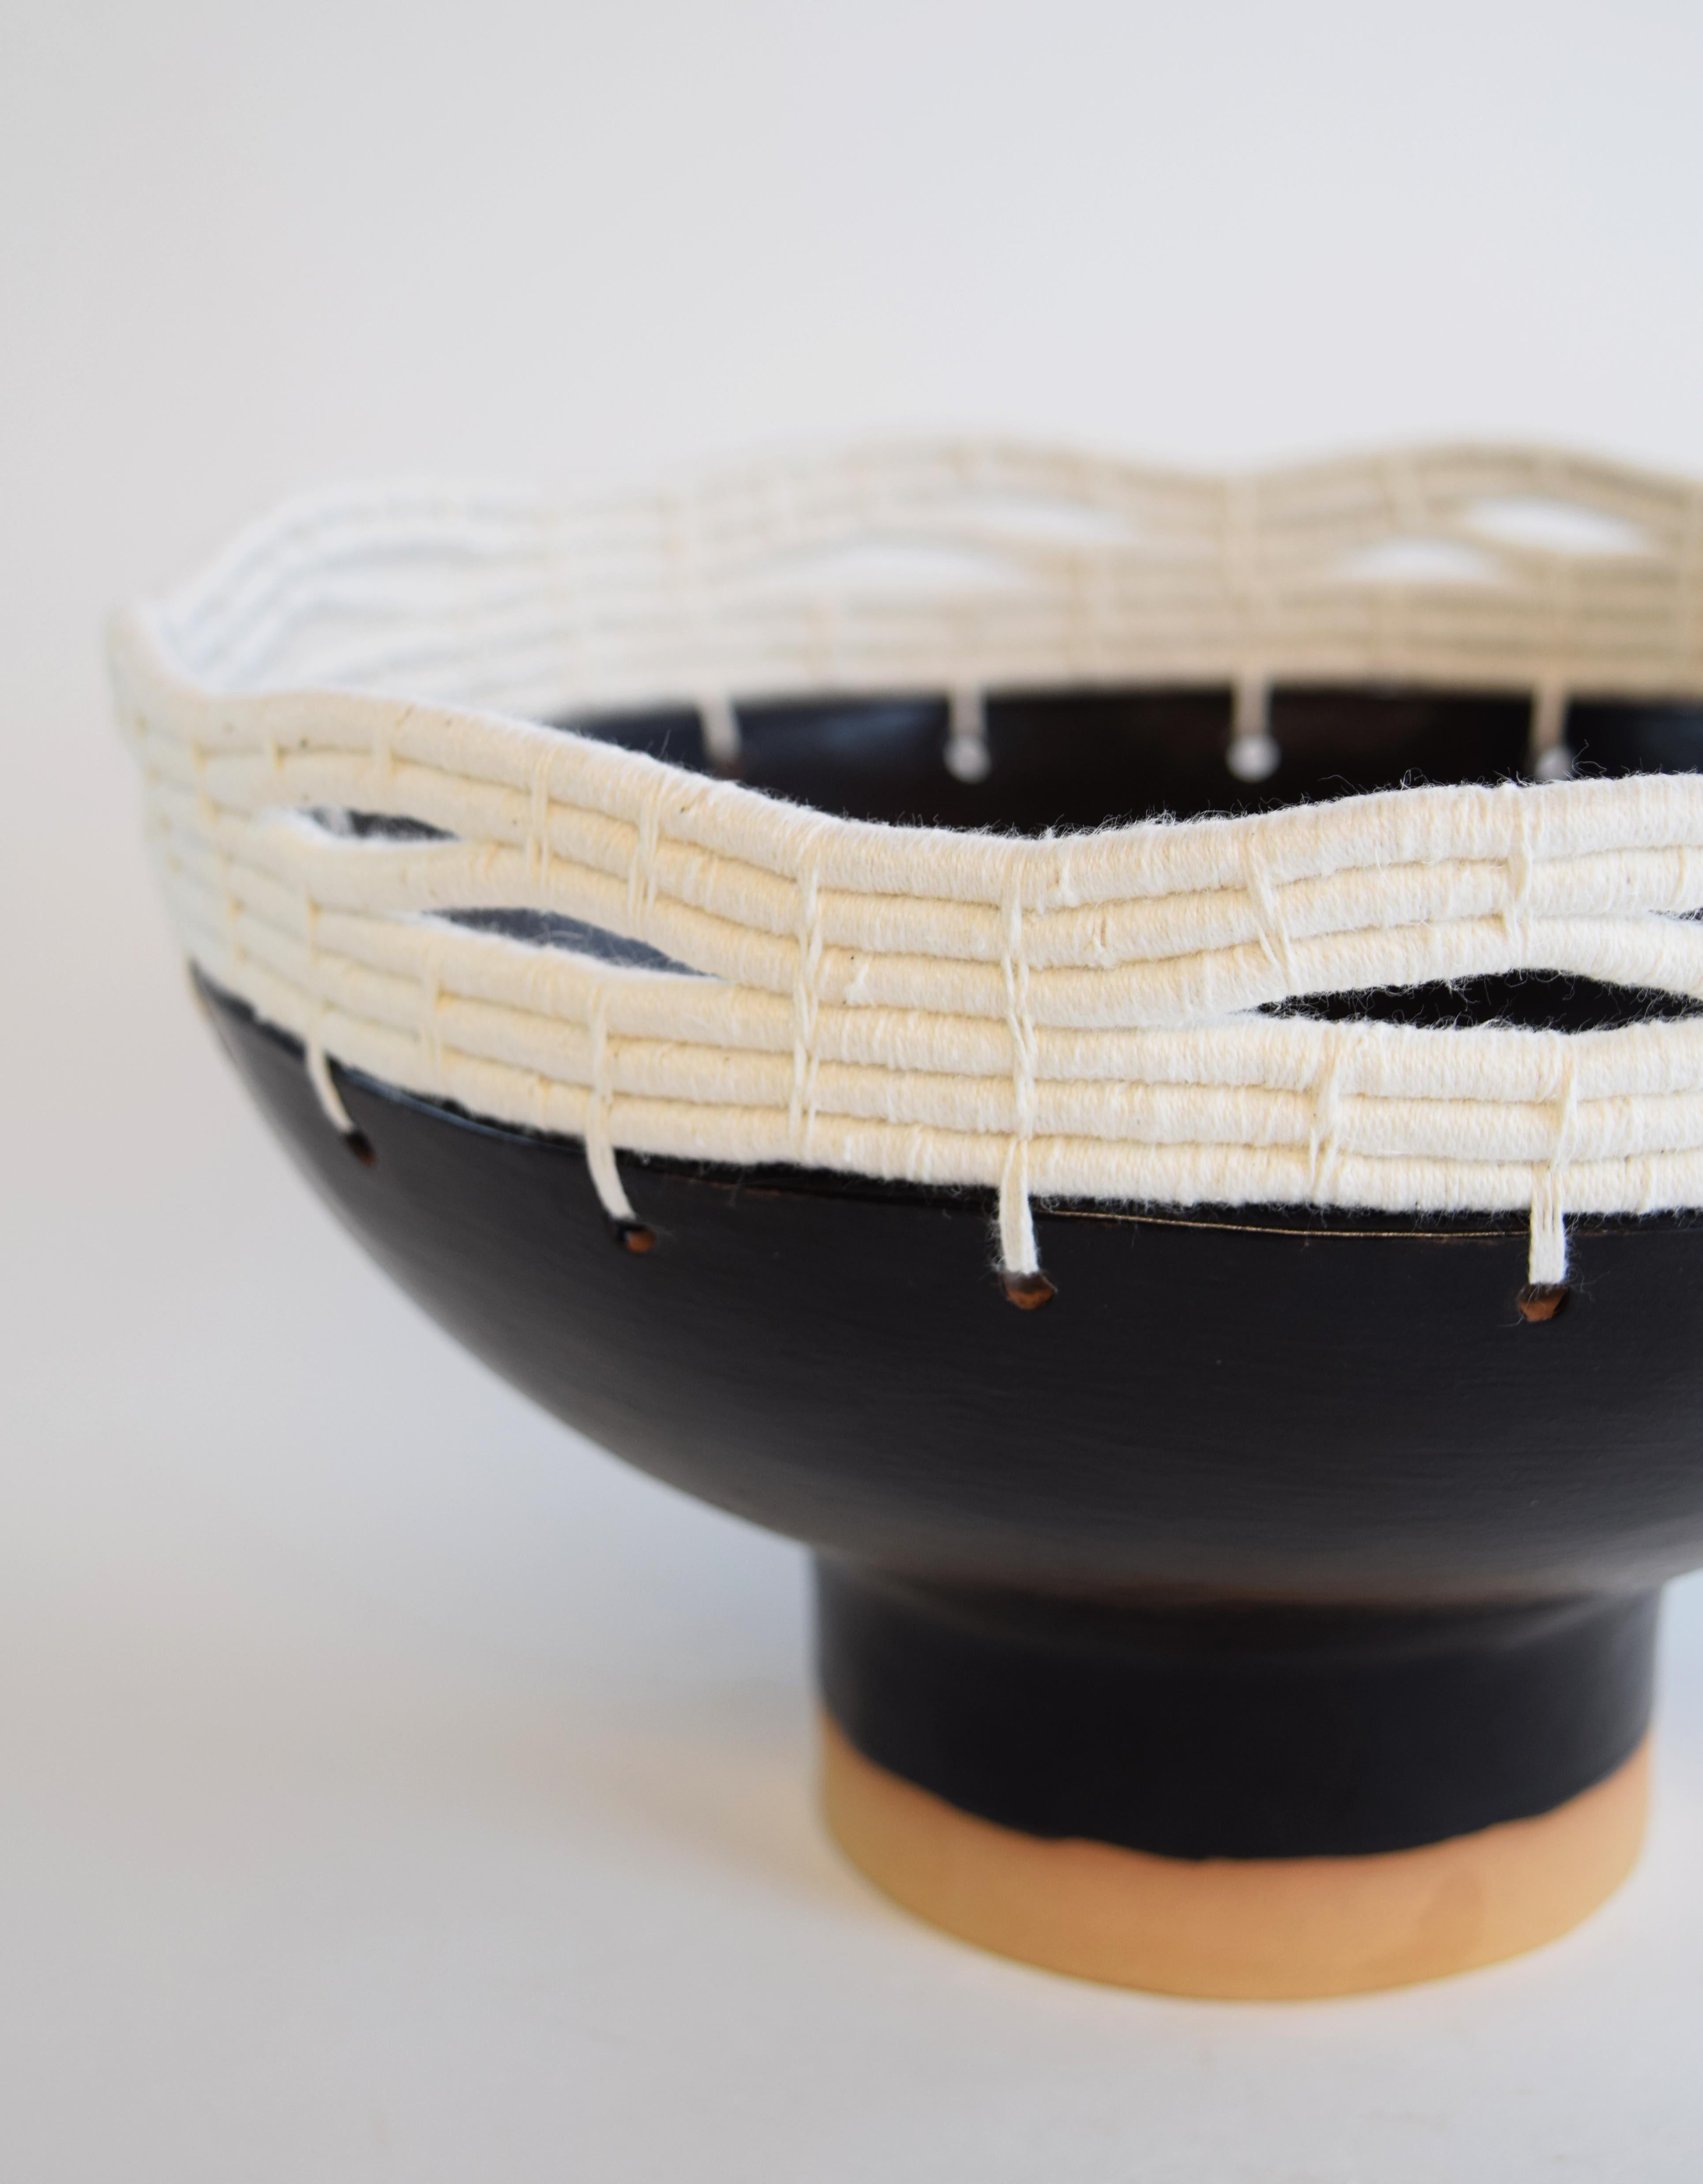 Hand formed stoneware bowl with satin black glaze. Woven white cotton edge detail. For decorative use only.

11